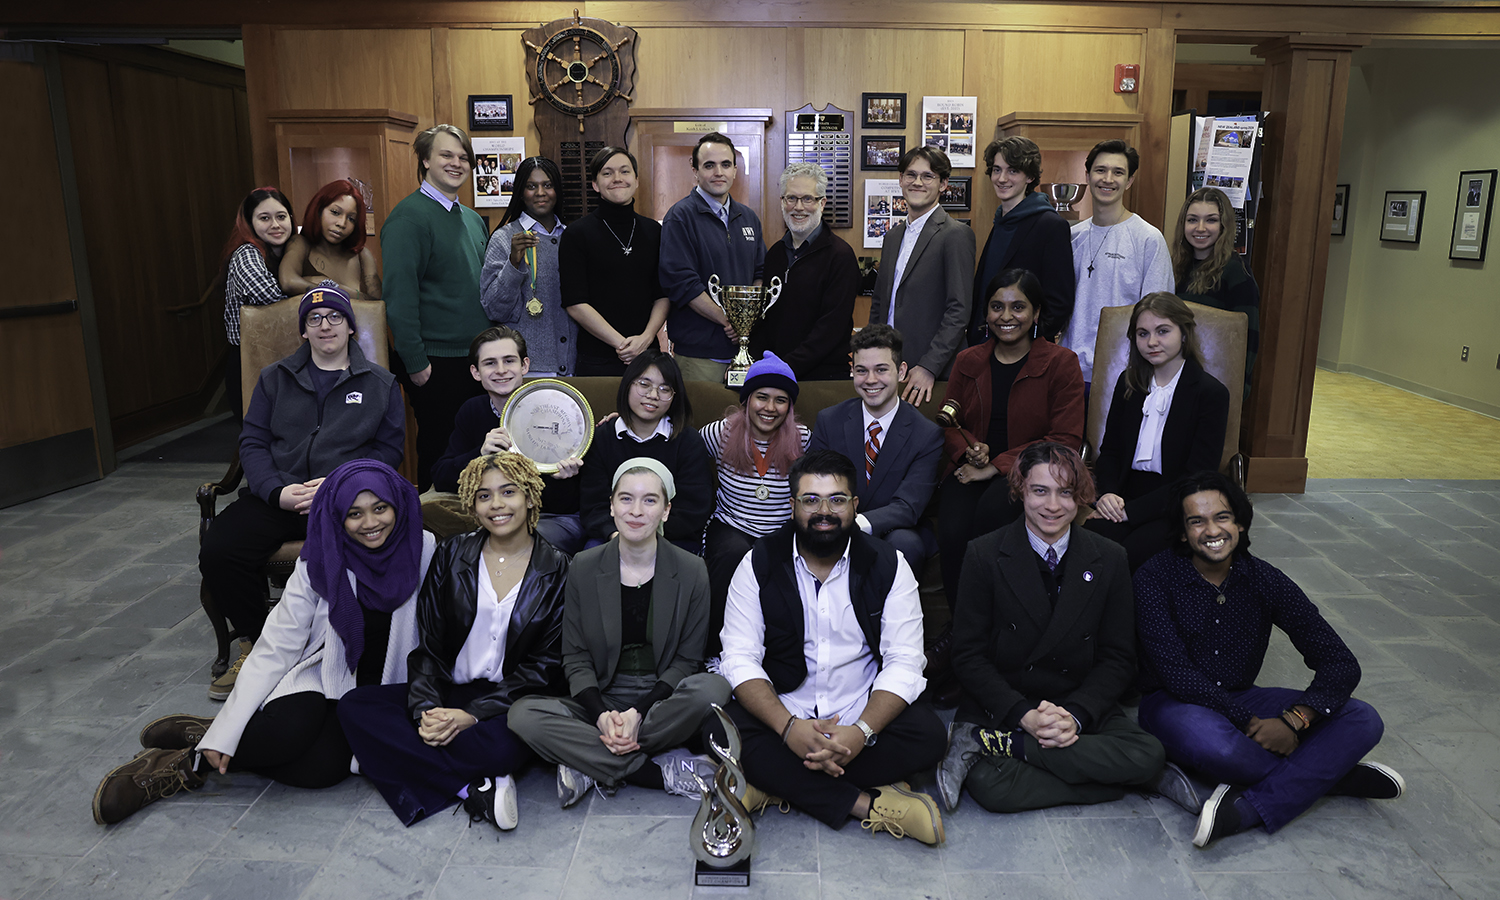 debate team pose for group photo with trophy case